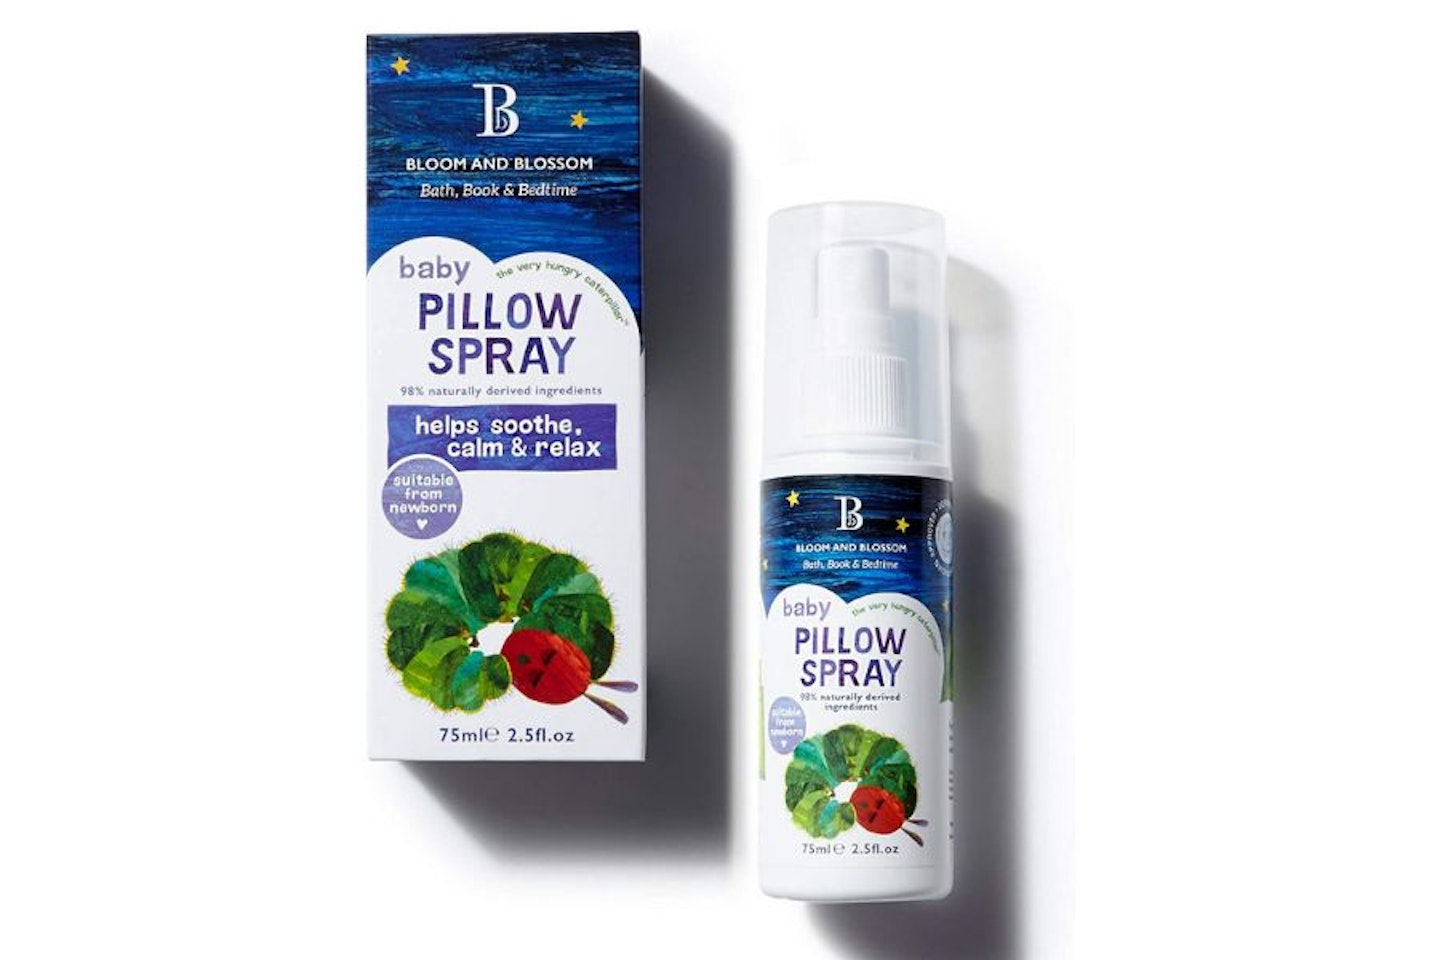 Bloom and Blossom Very Hungry Caterpillow Pillow Spray